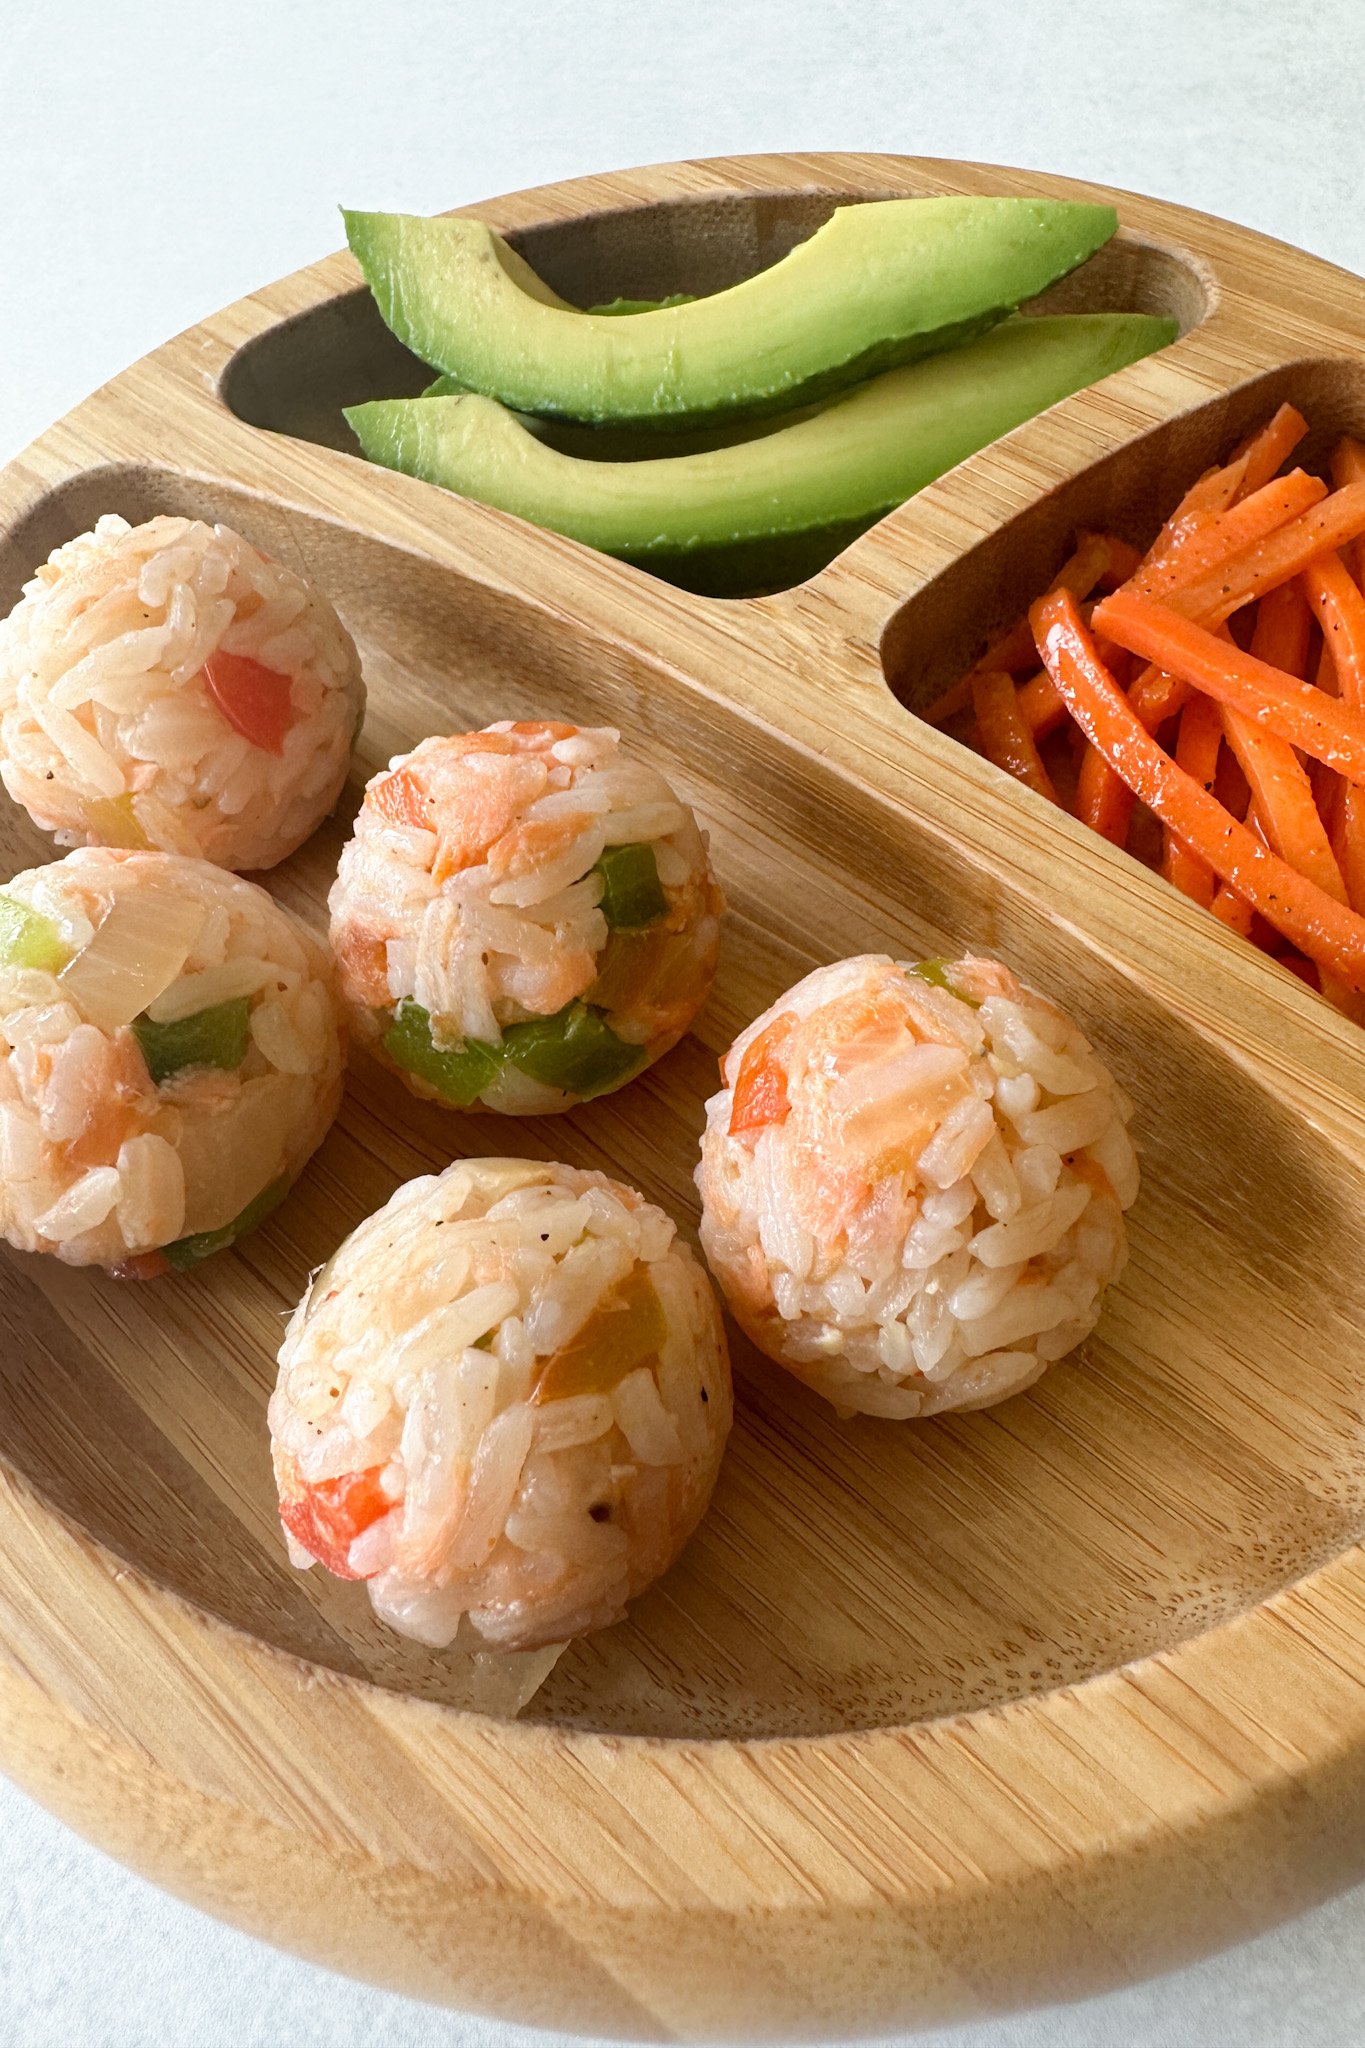 Salmon rice balls served with avocado and carrots.